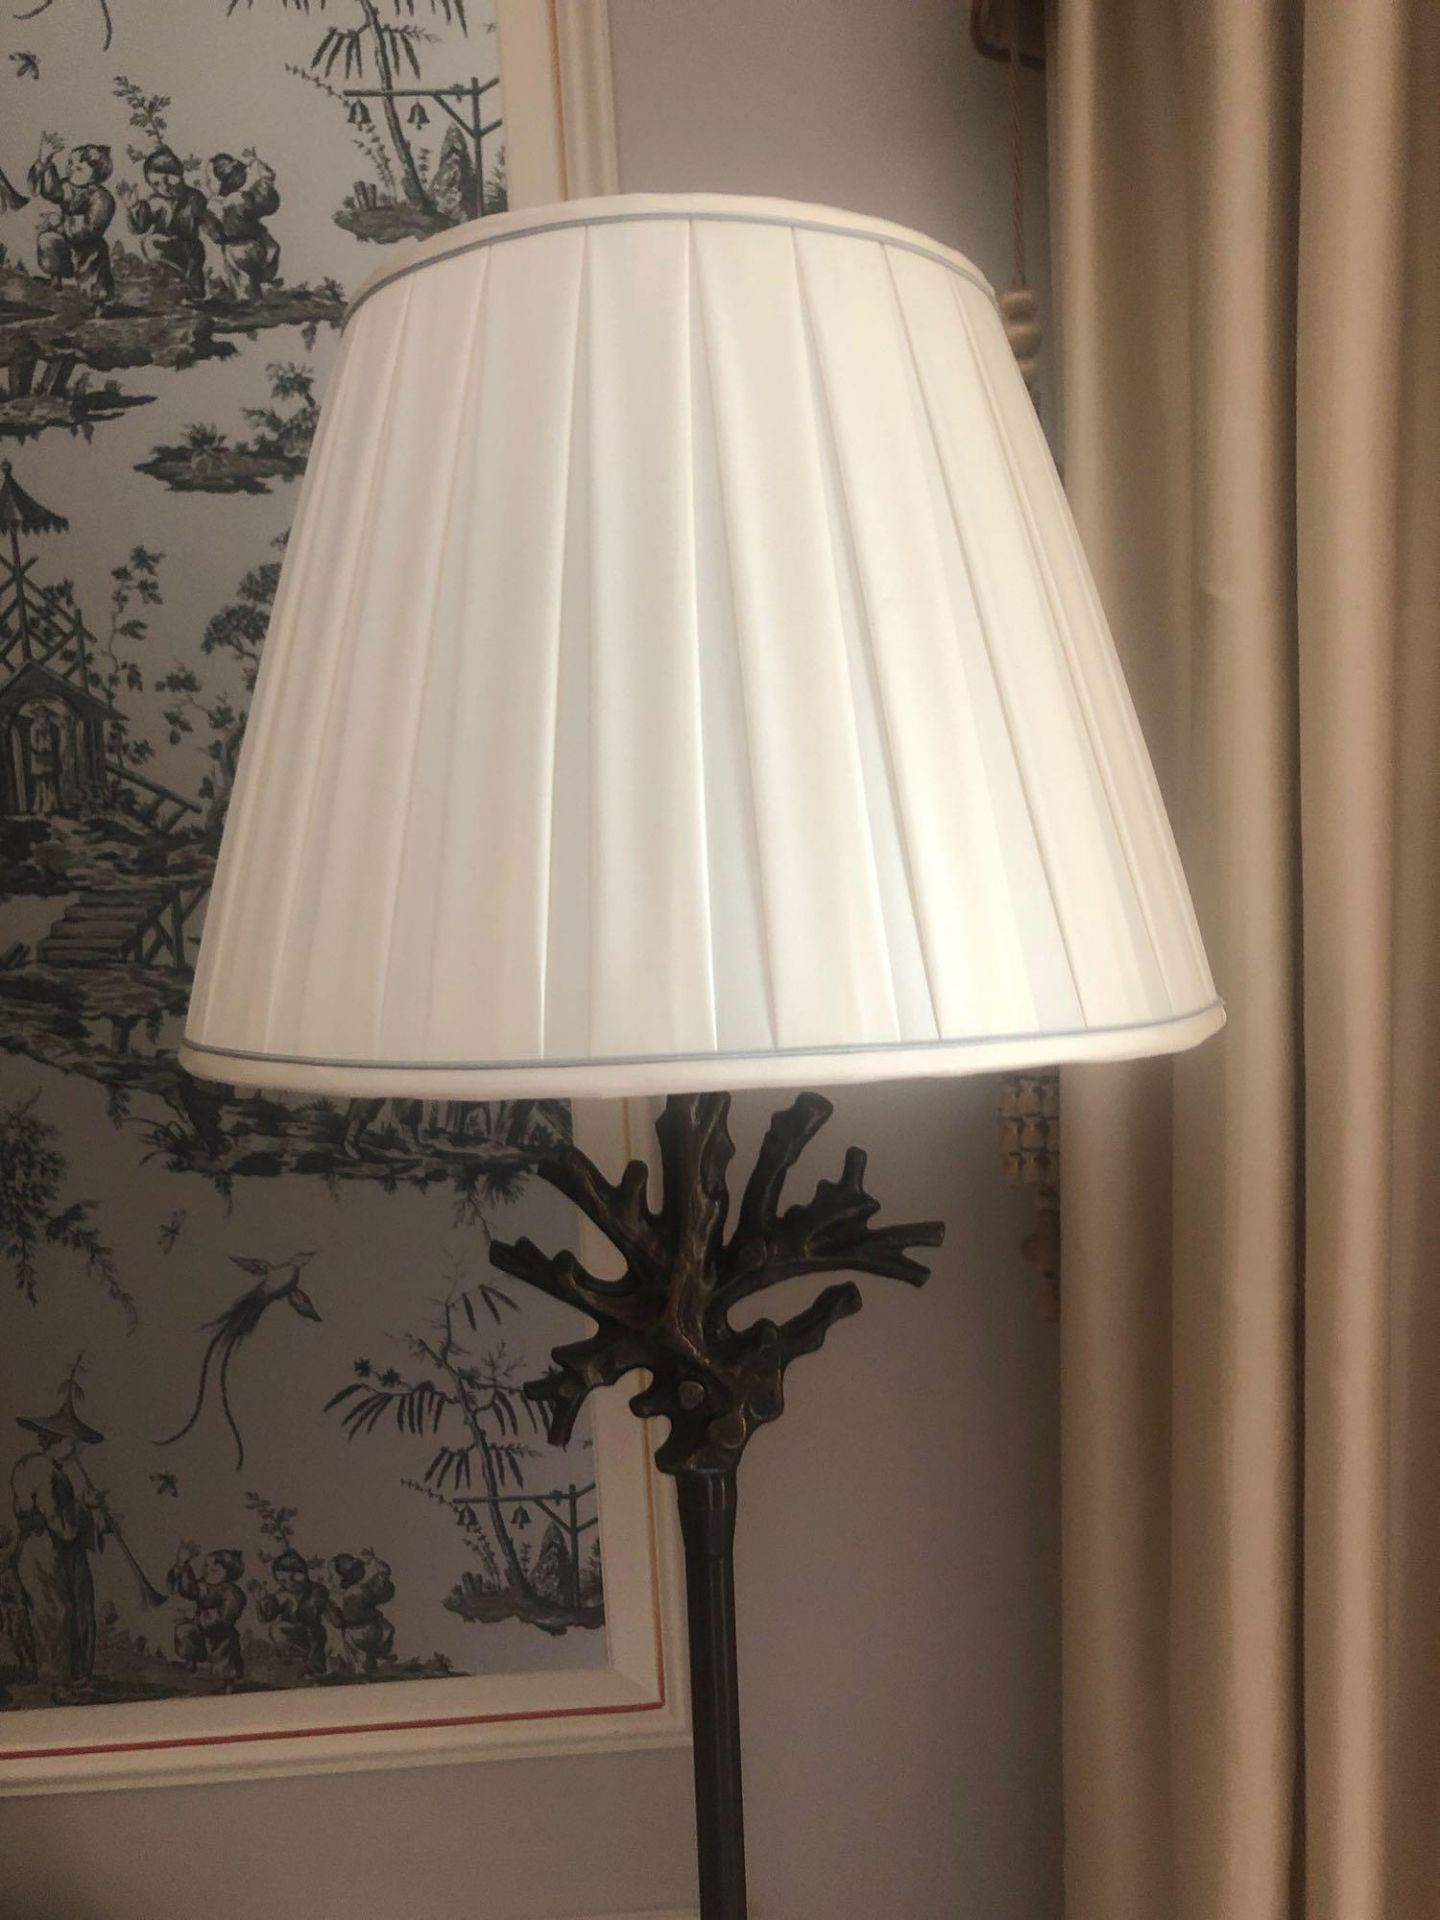 Heathfield And Co Coral Standard Lamp With Linen Shade 180cms (Room 217/8) - Image 2 of 2